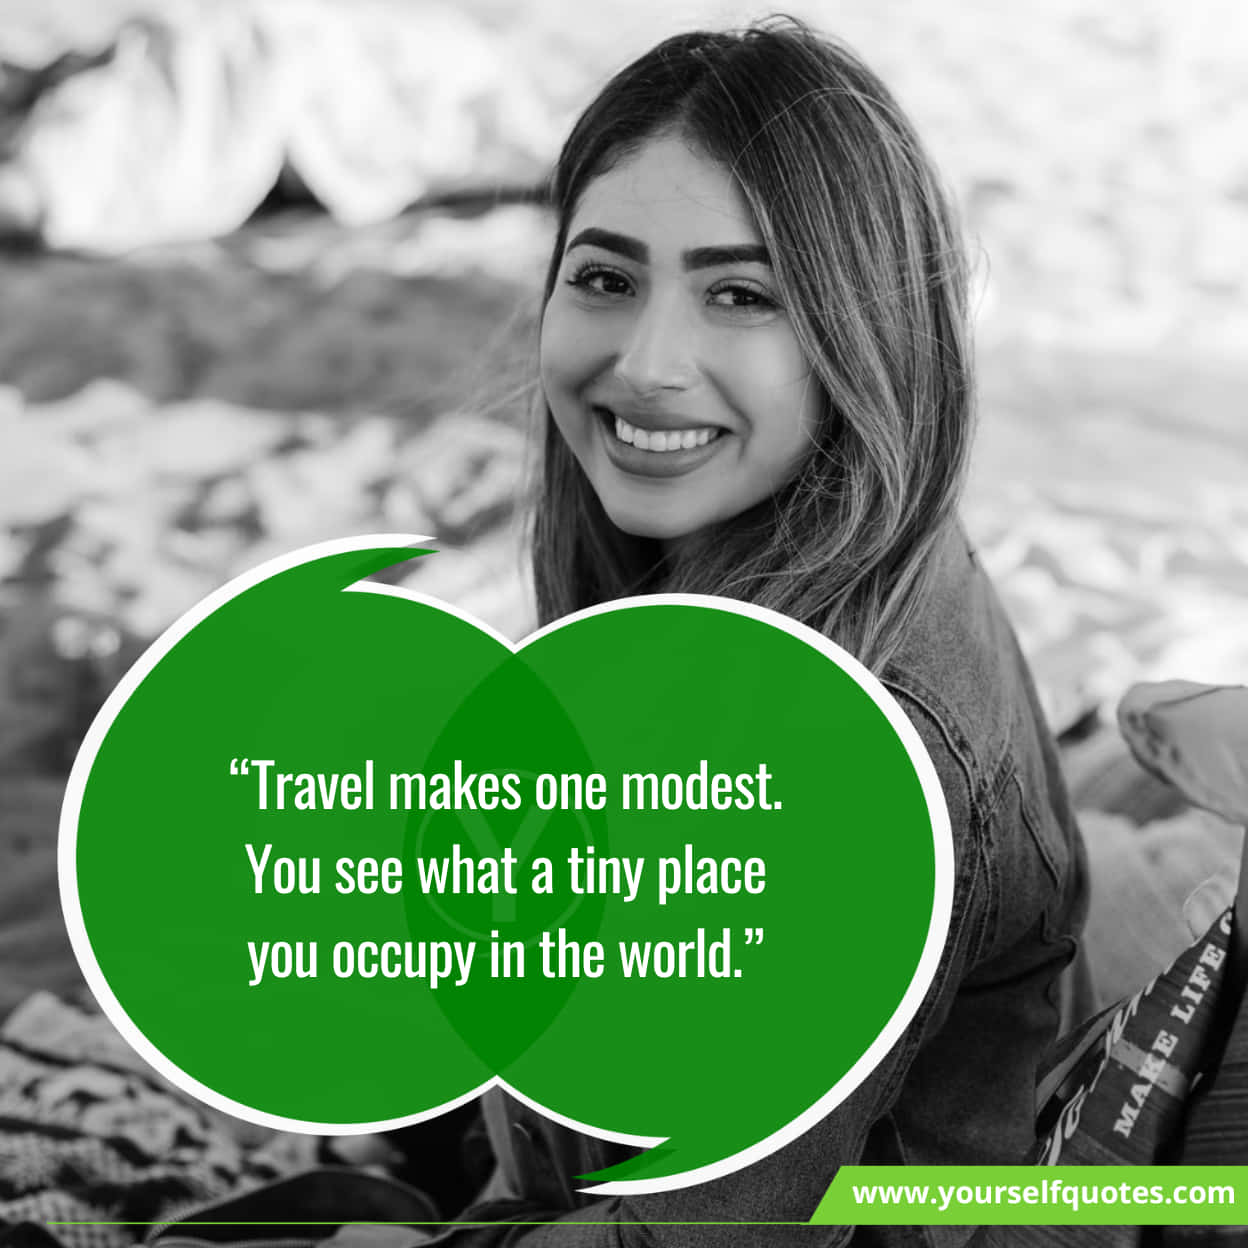 Best Travel Quotes To Start Journey